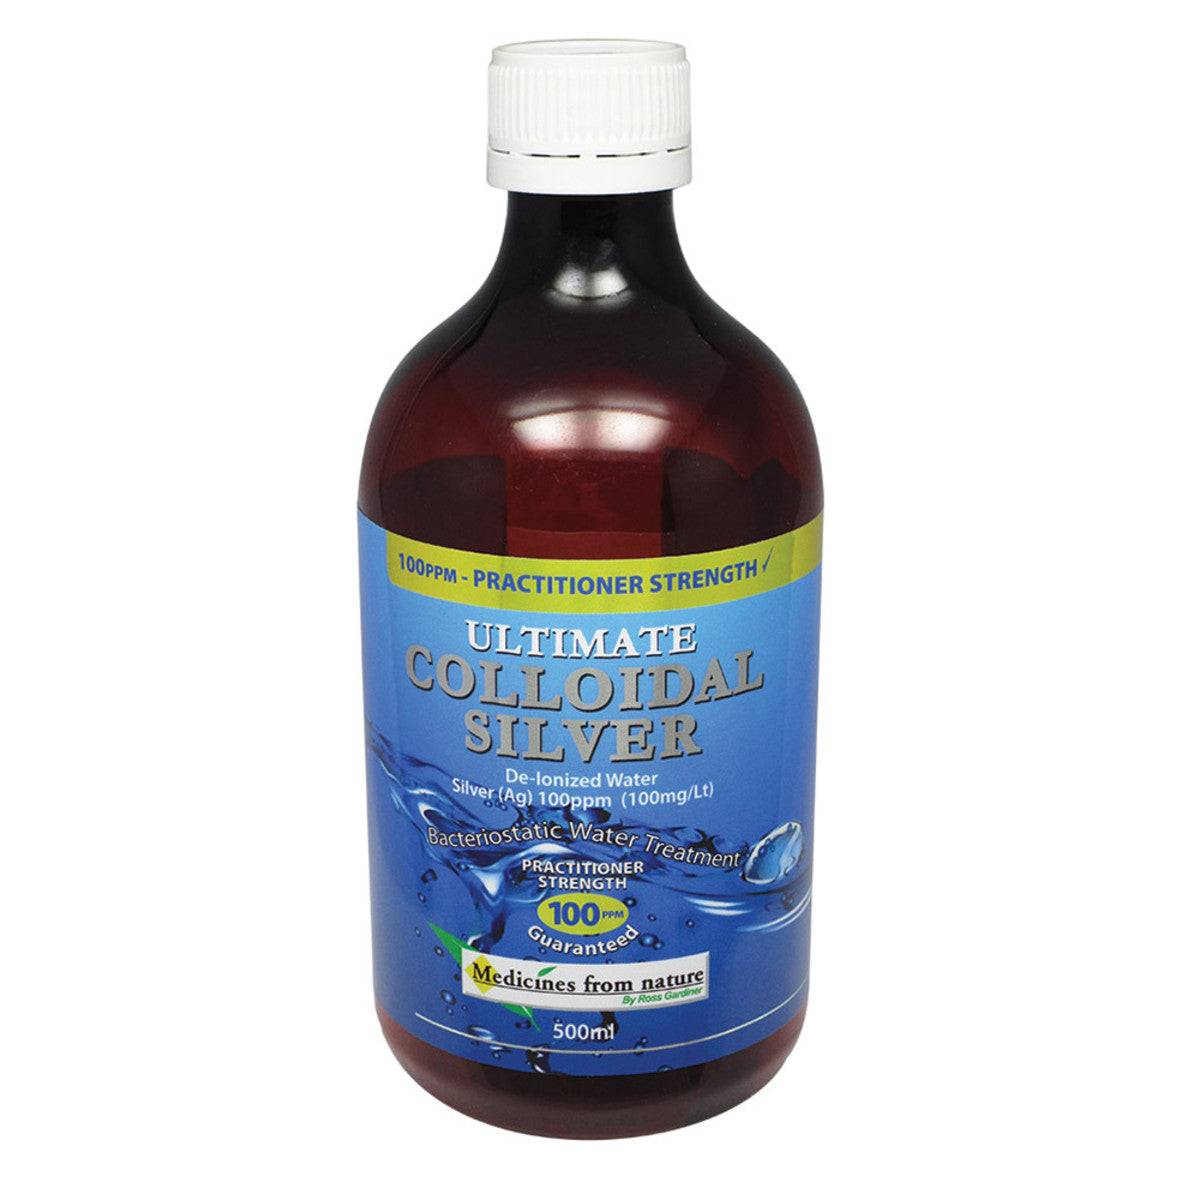 Medicines From Nature - Ultimate Colloidal Silver Practitioner Strength 100ppm